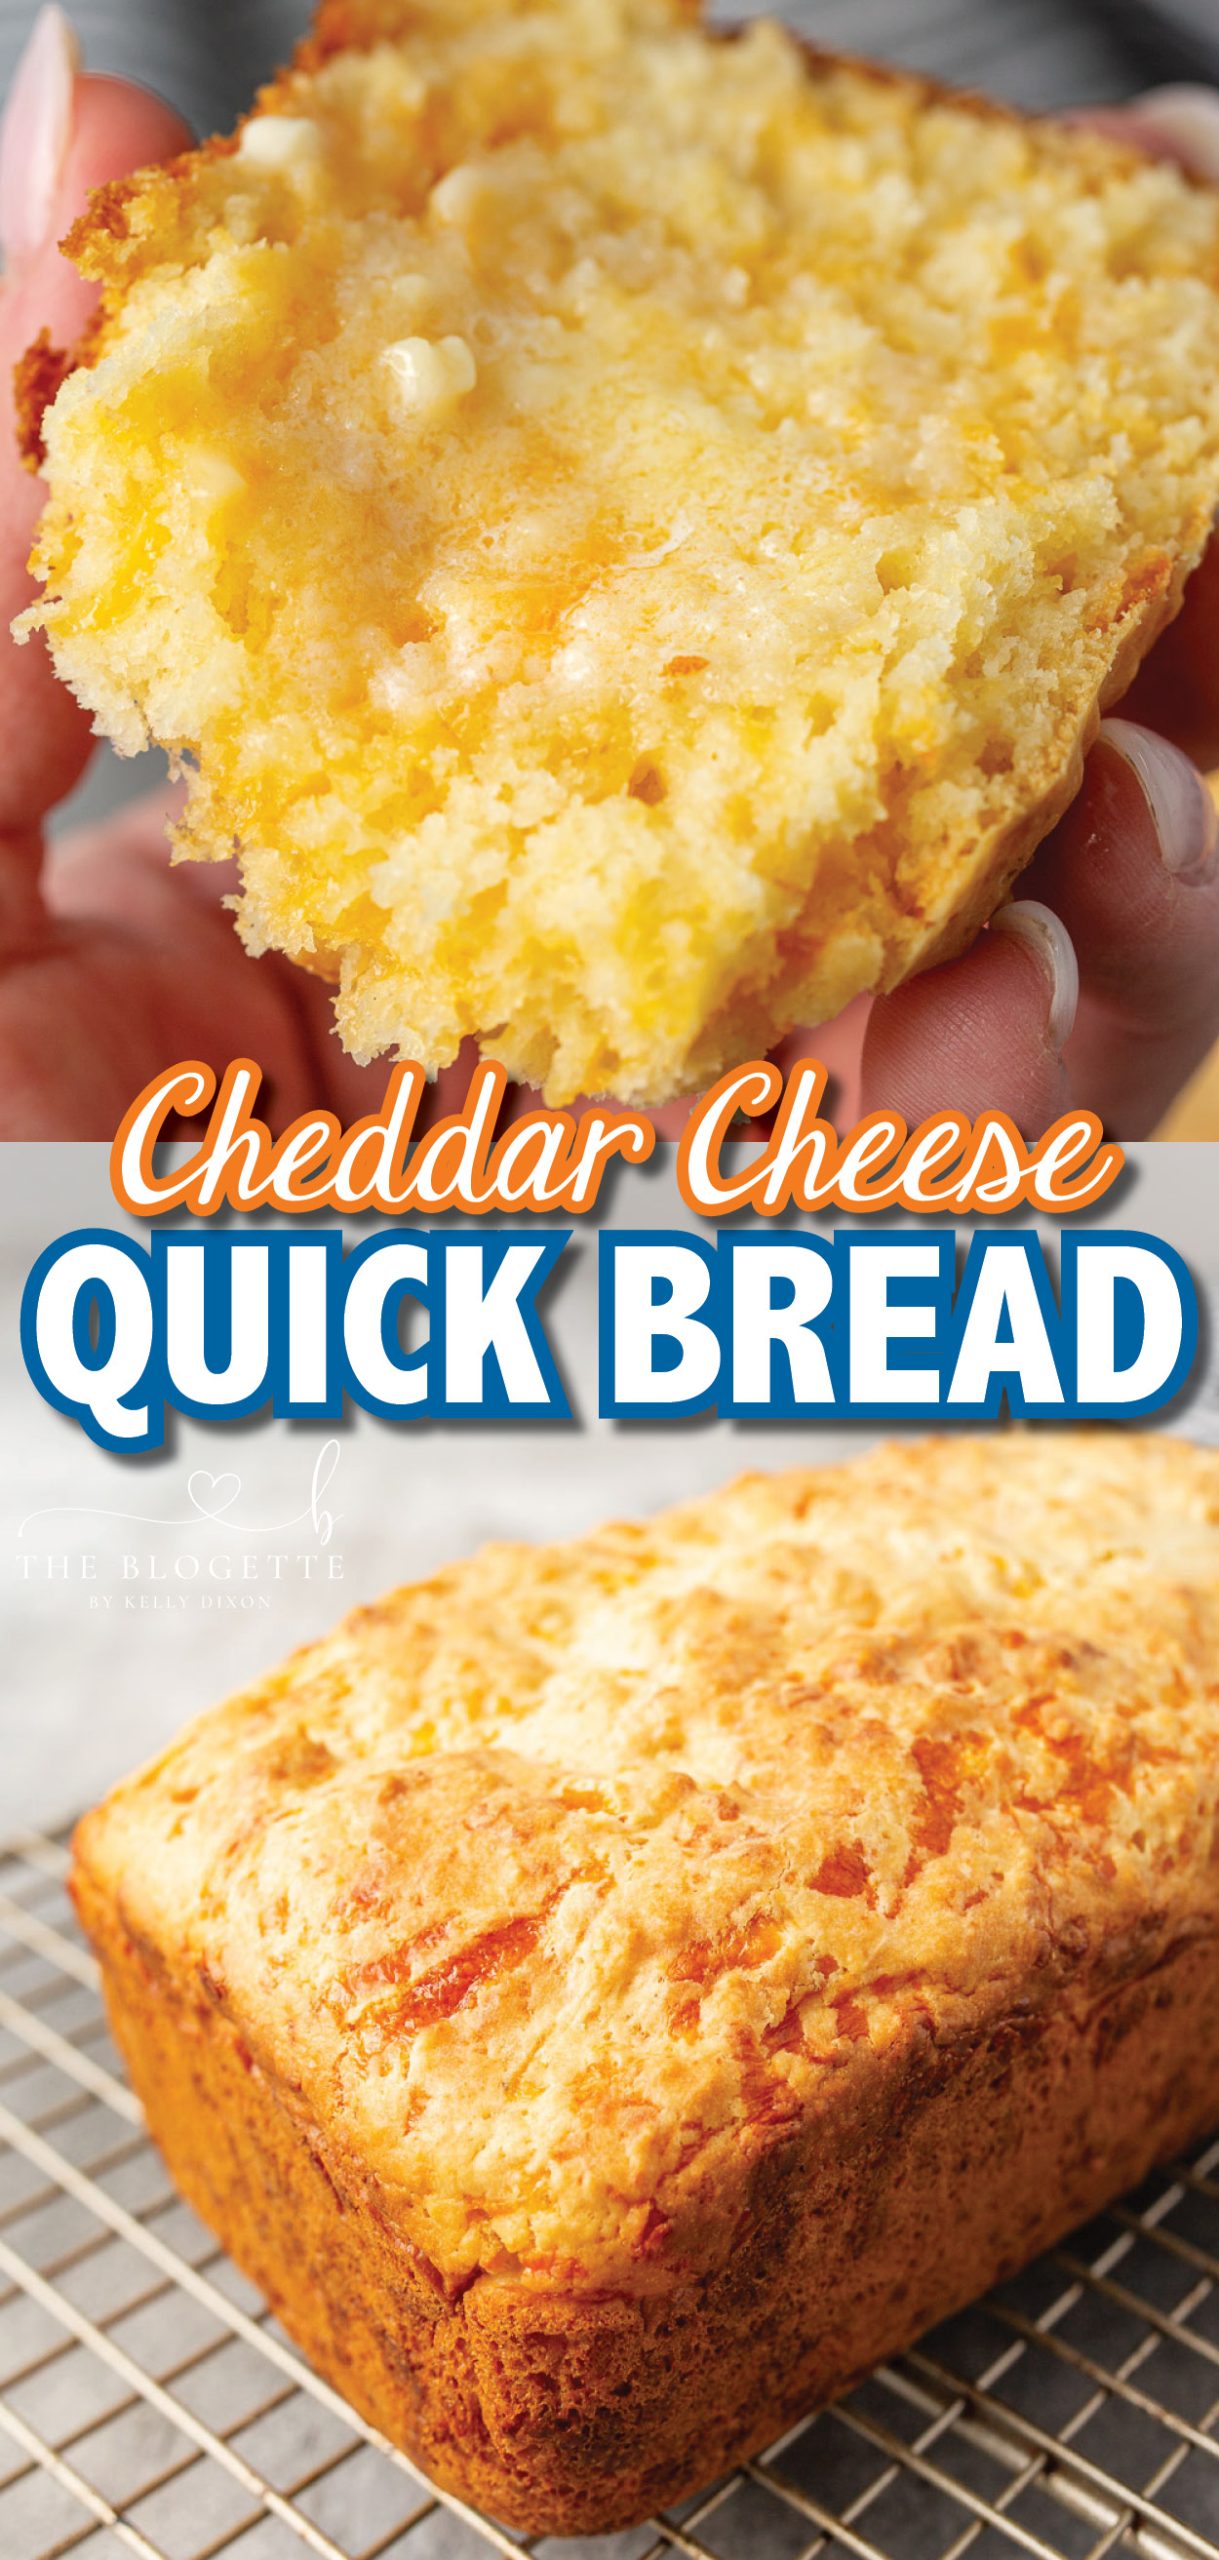 Easy, Cheesy, Cheddar Quick Bread is a soft and delicious fool-proof recipe you need to keep on hand. This extra fast bread recipe is ready to bake in less than 15 minutes. No yeast, kneading, or rising time is needed.